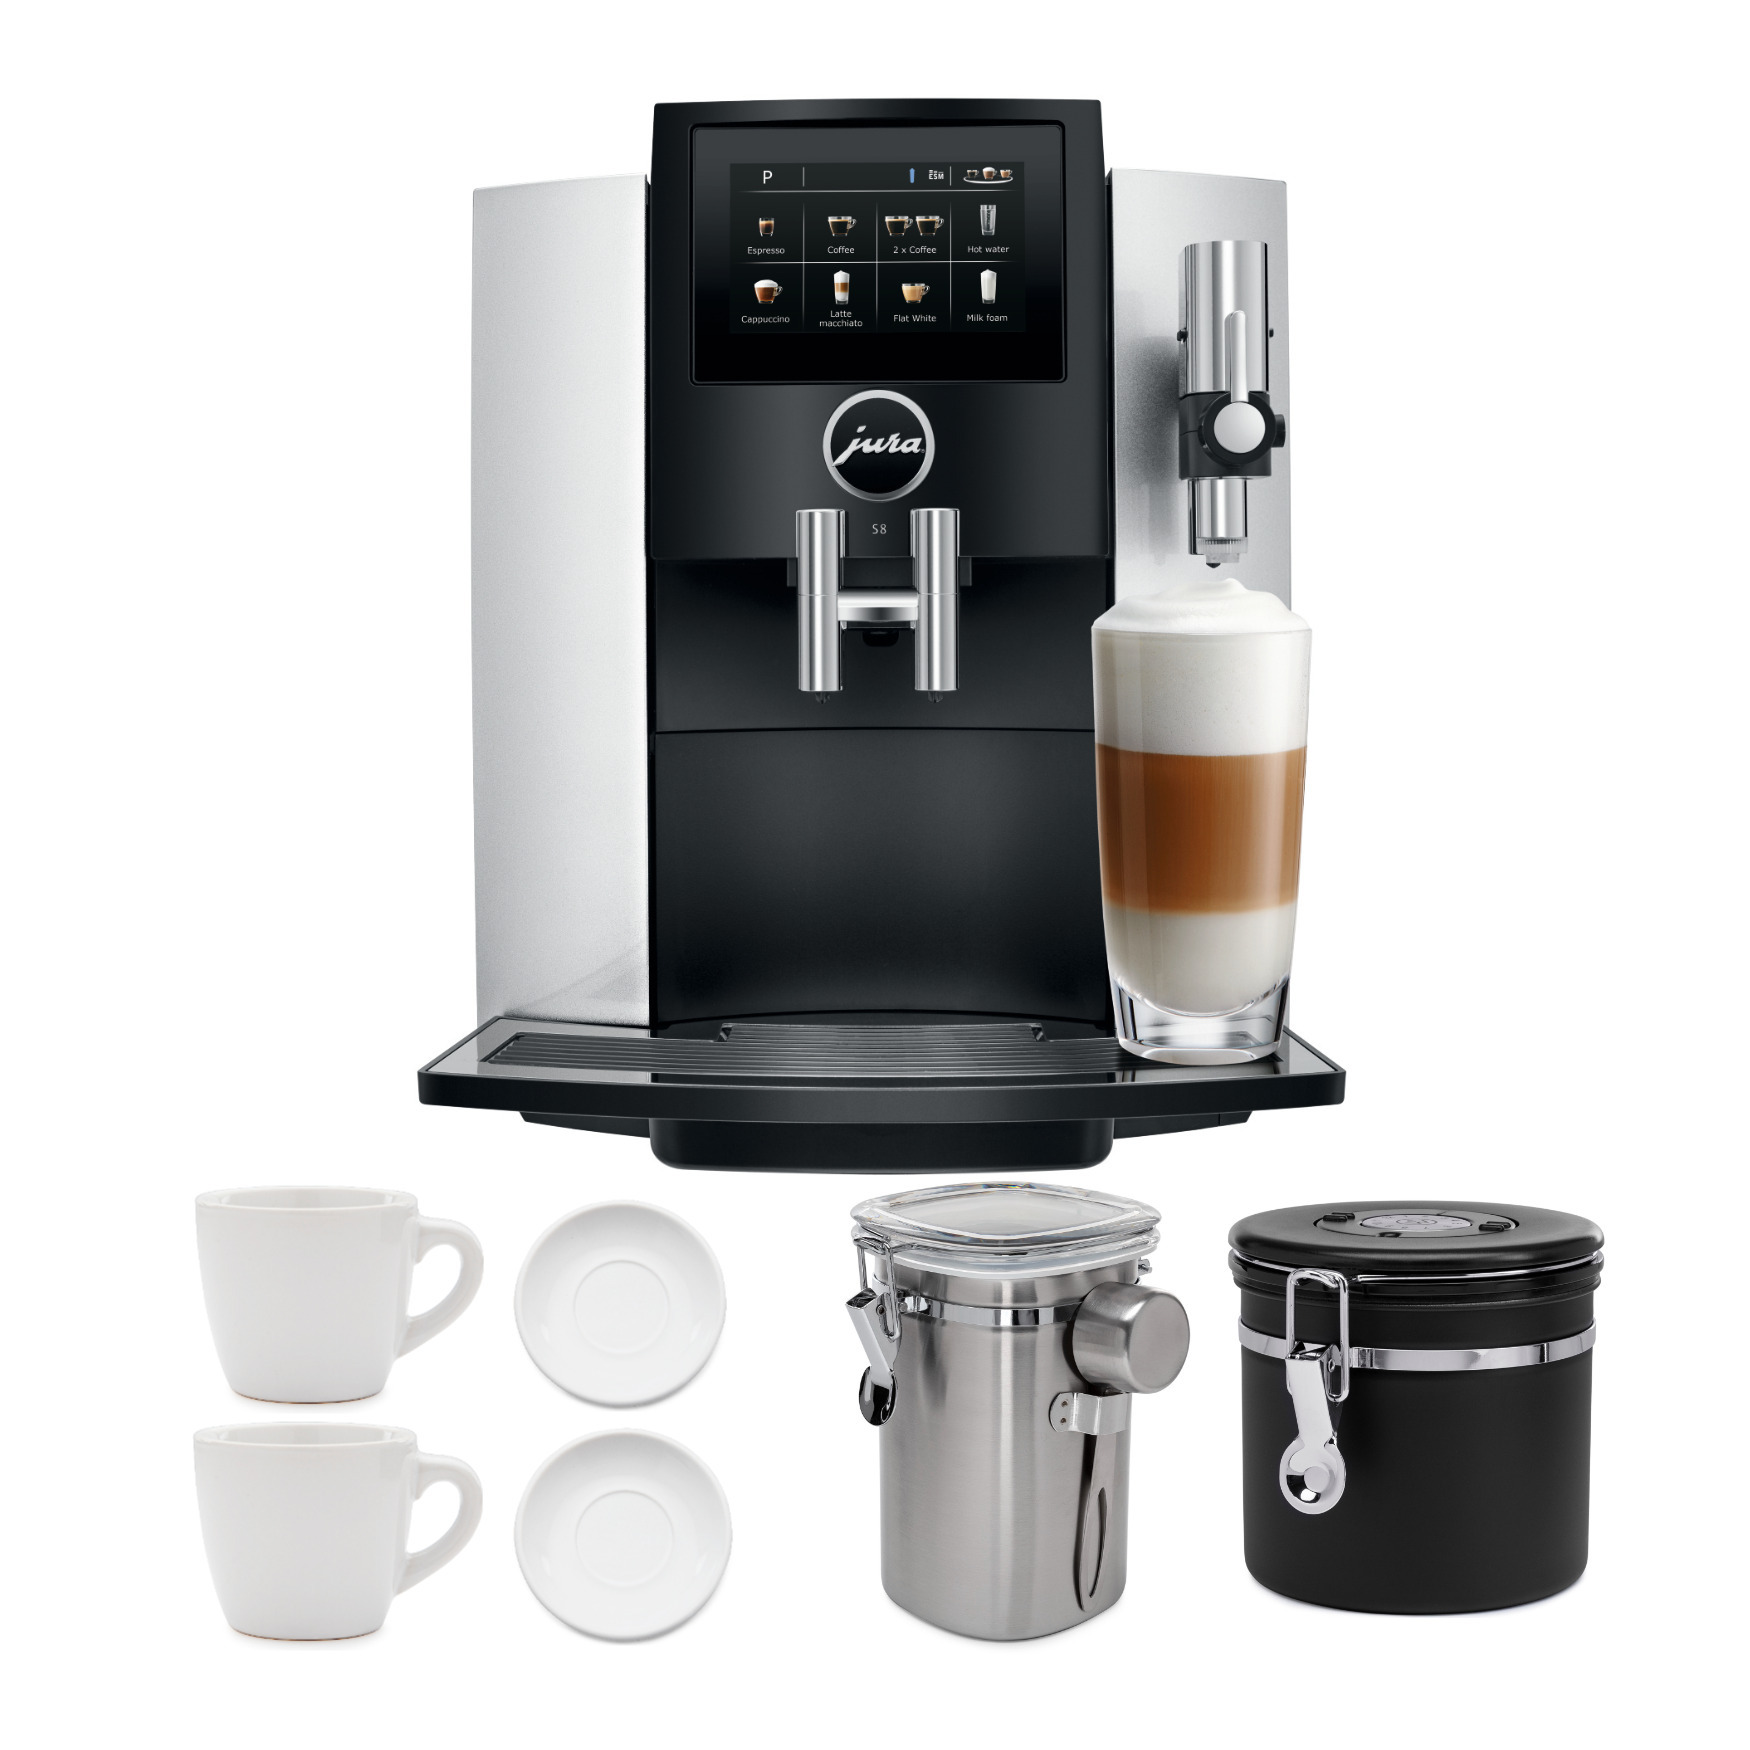 Jura S8 Automatic Coffee Machine with 2 Cup and Saucer Sets Bundle